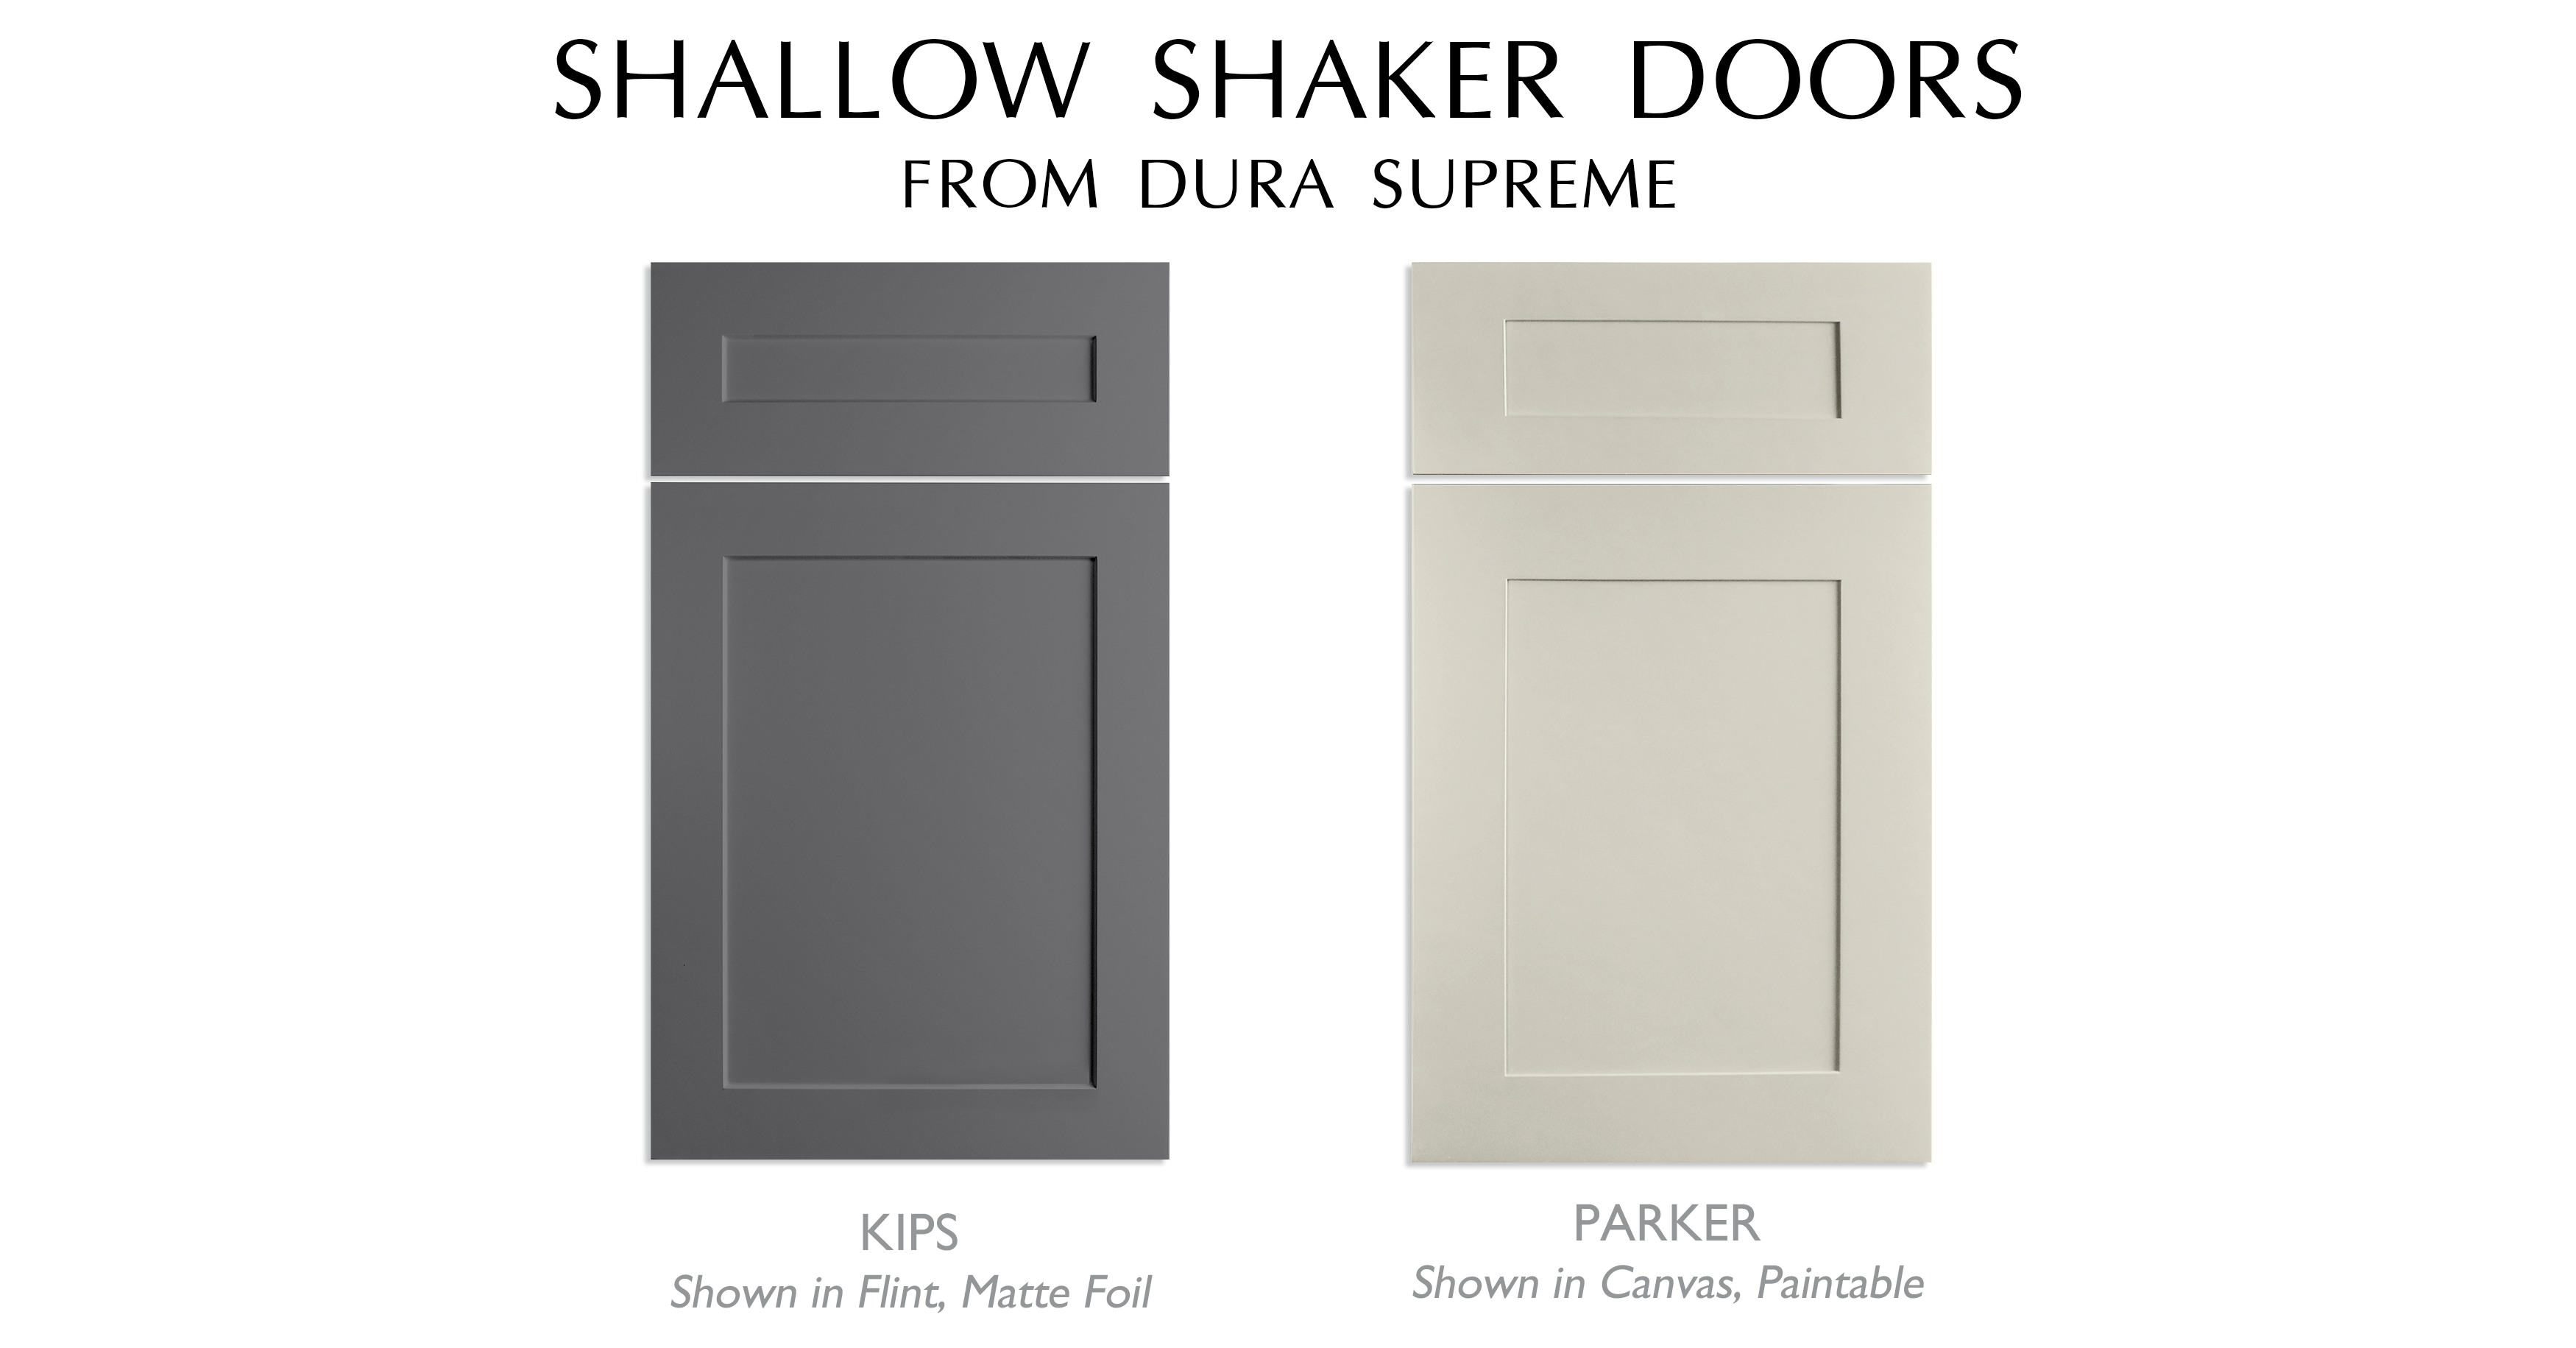 An example of two shallow shaker cabinet door styles with thinly raised stiles and rails and a shallow, flat center panel from Dura Supreme Cabinetry.